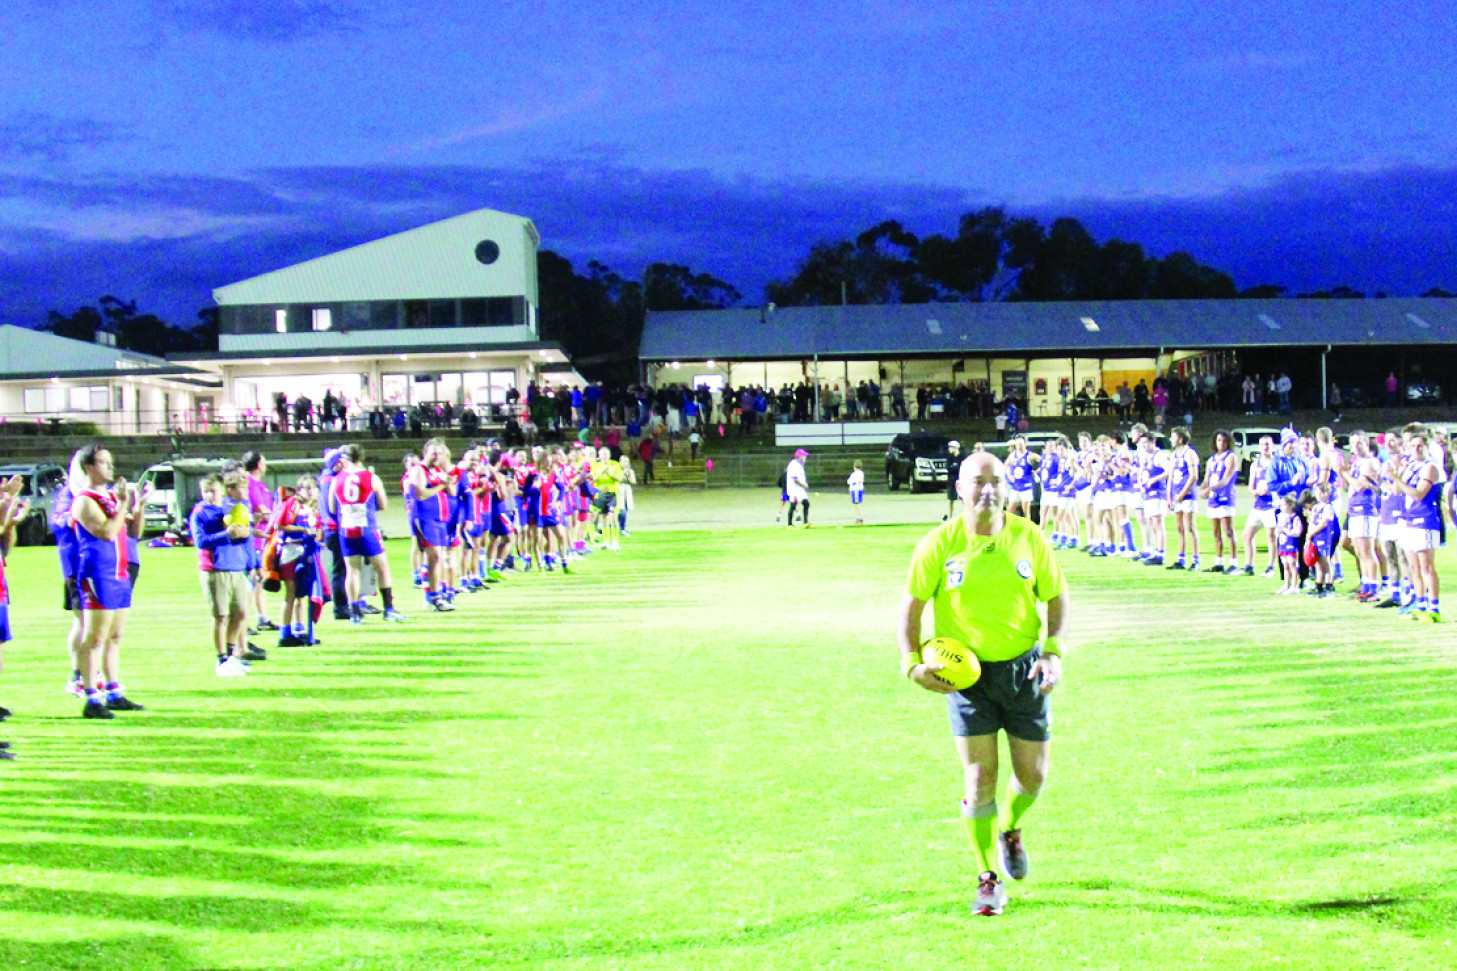 Donald and St. Arnaud teams formed a guard of honour for Darren marking his last game umpiring